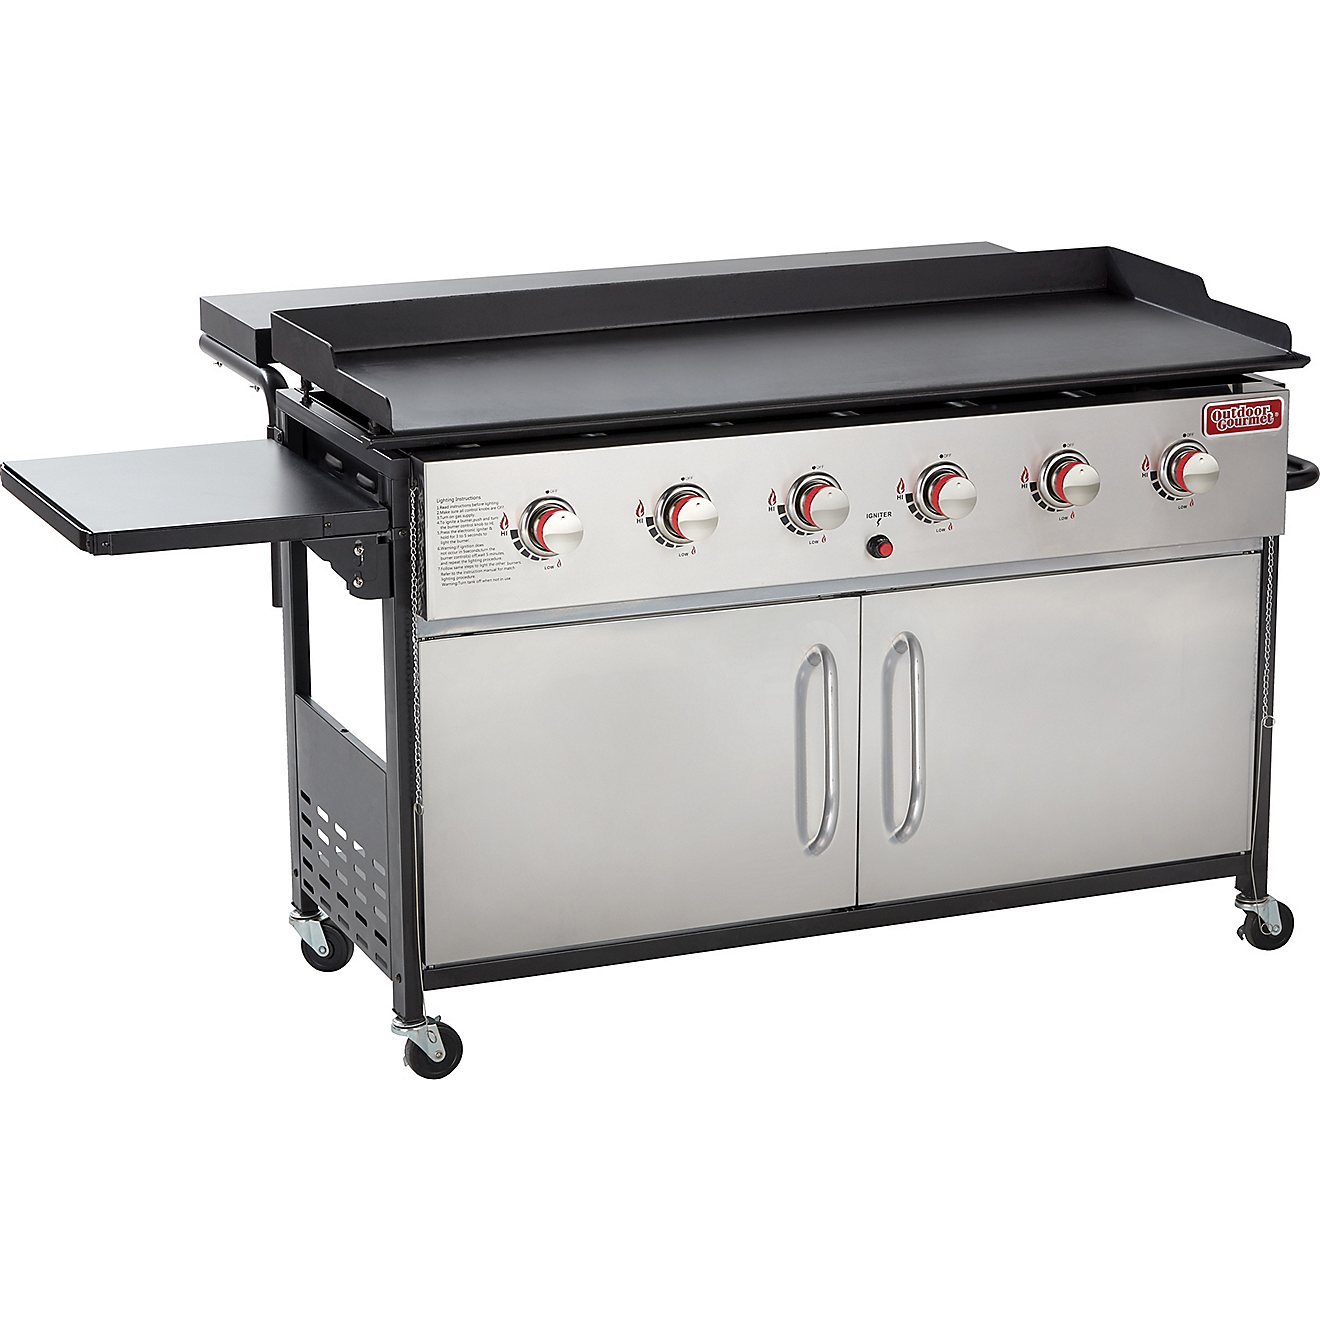 Outdoor Gourmet 6 Burner Stainless, Outdoor Propane Griddle With Lid